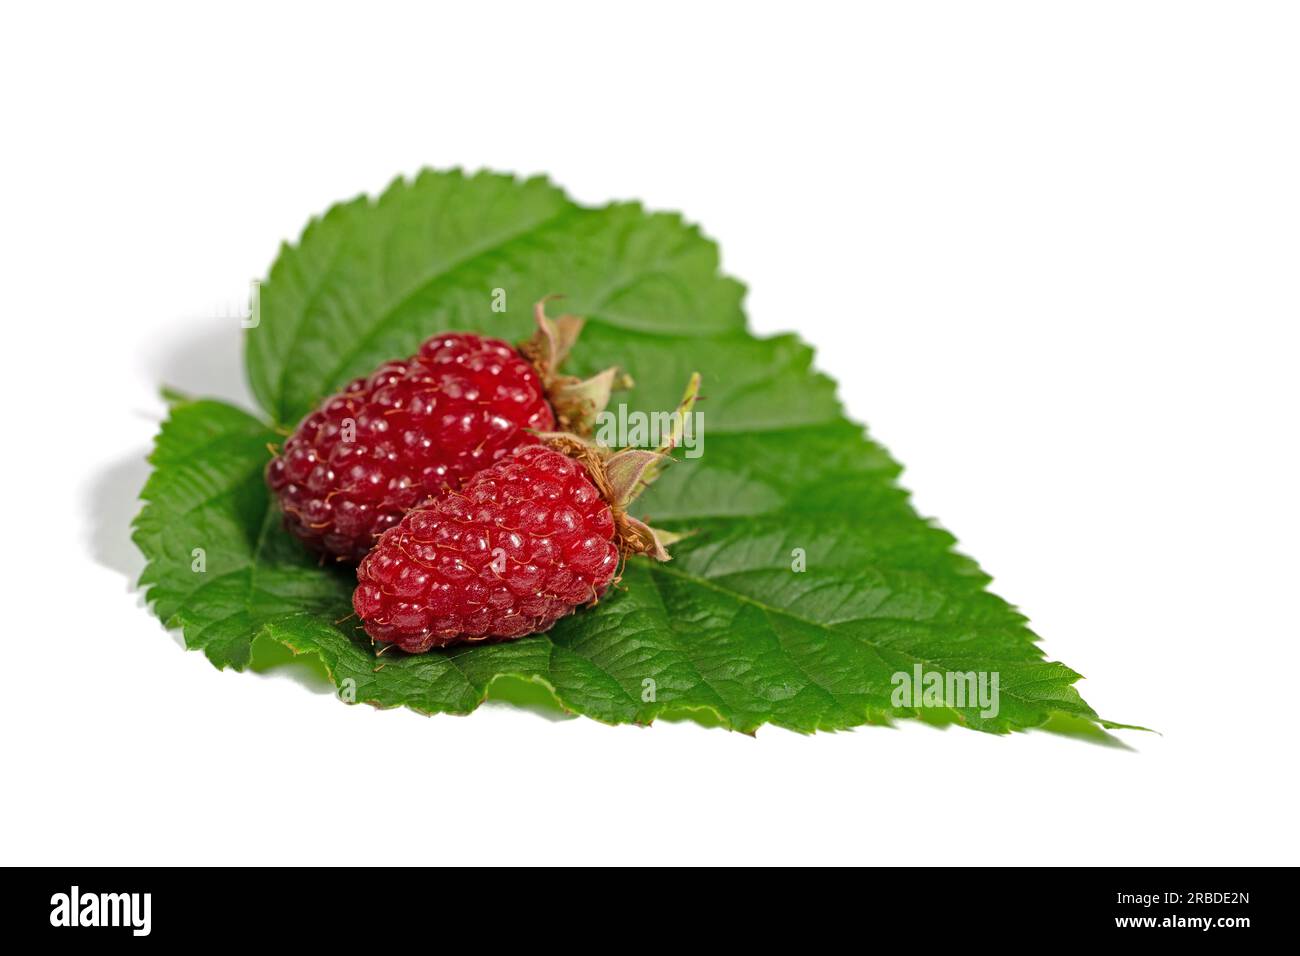 Tayberries against a white background Stock Photo